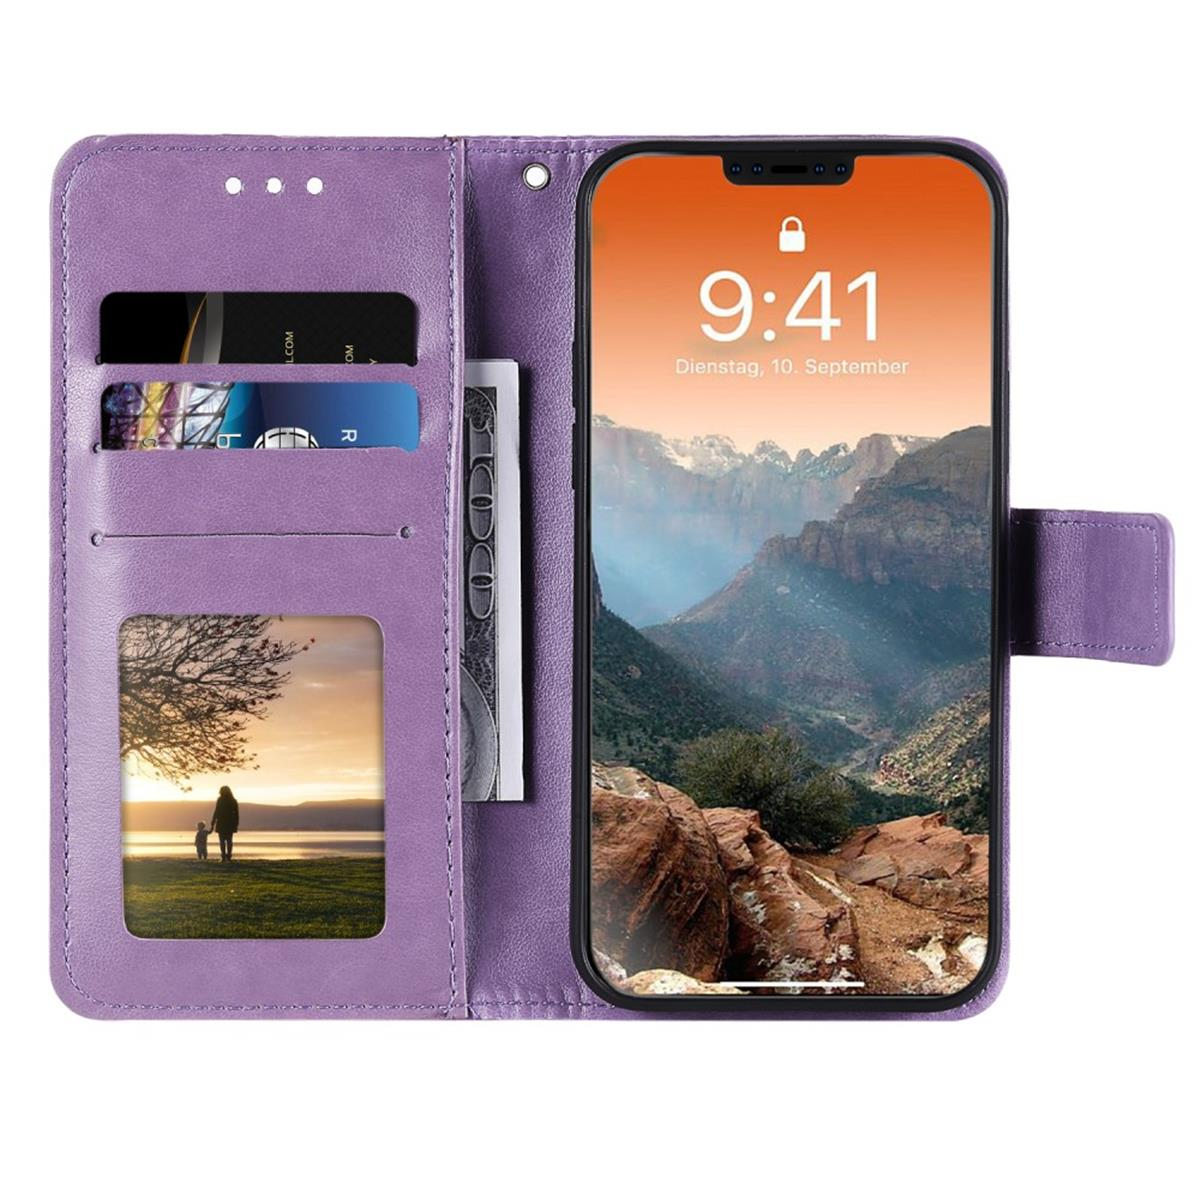 COVERKINGZ Klapphülle mit Max, 12 Pro Muster, Bookcover, iPhone Apple, Lila Mandala